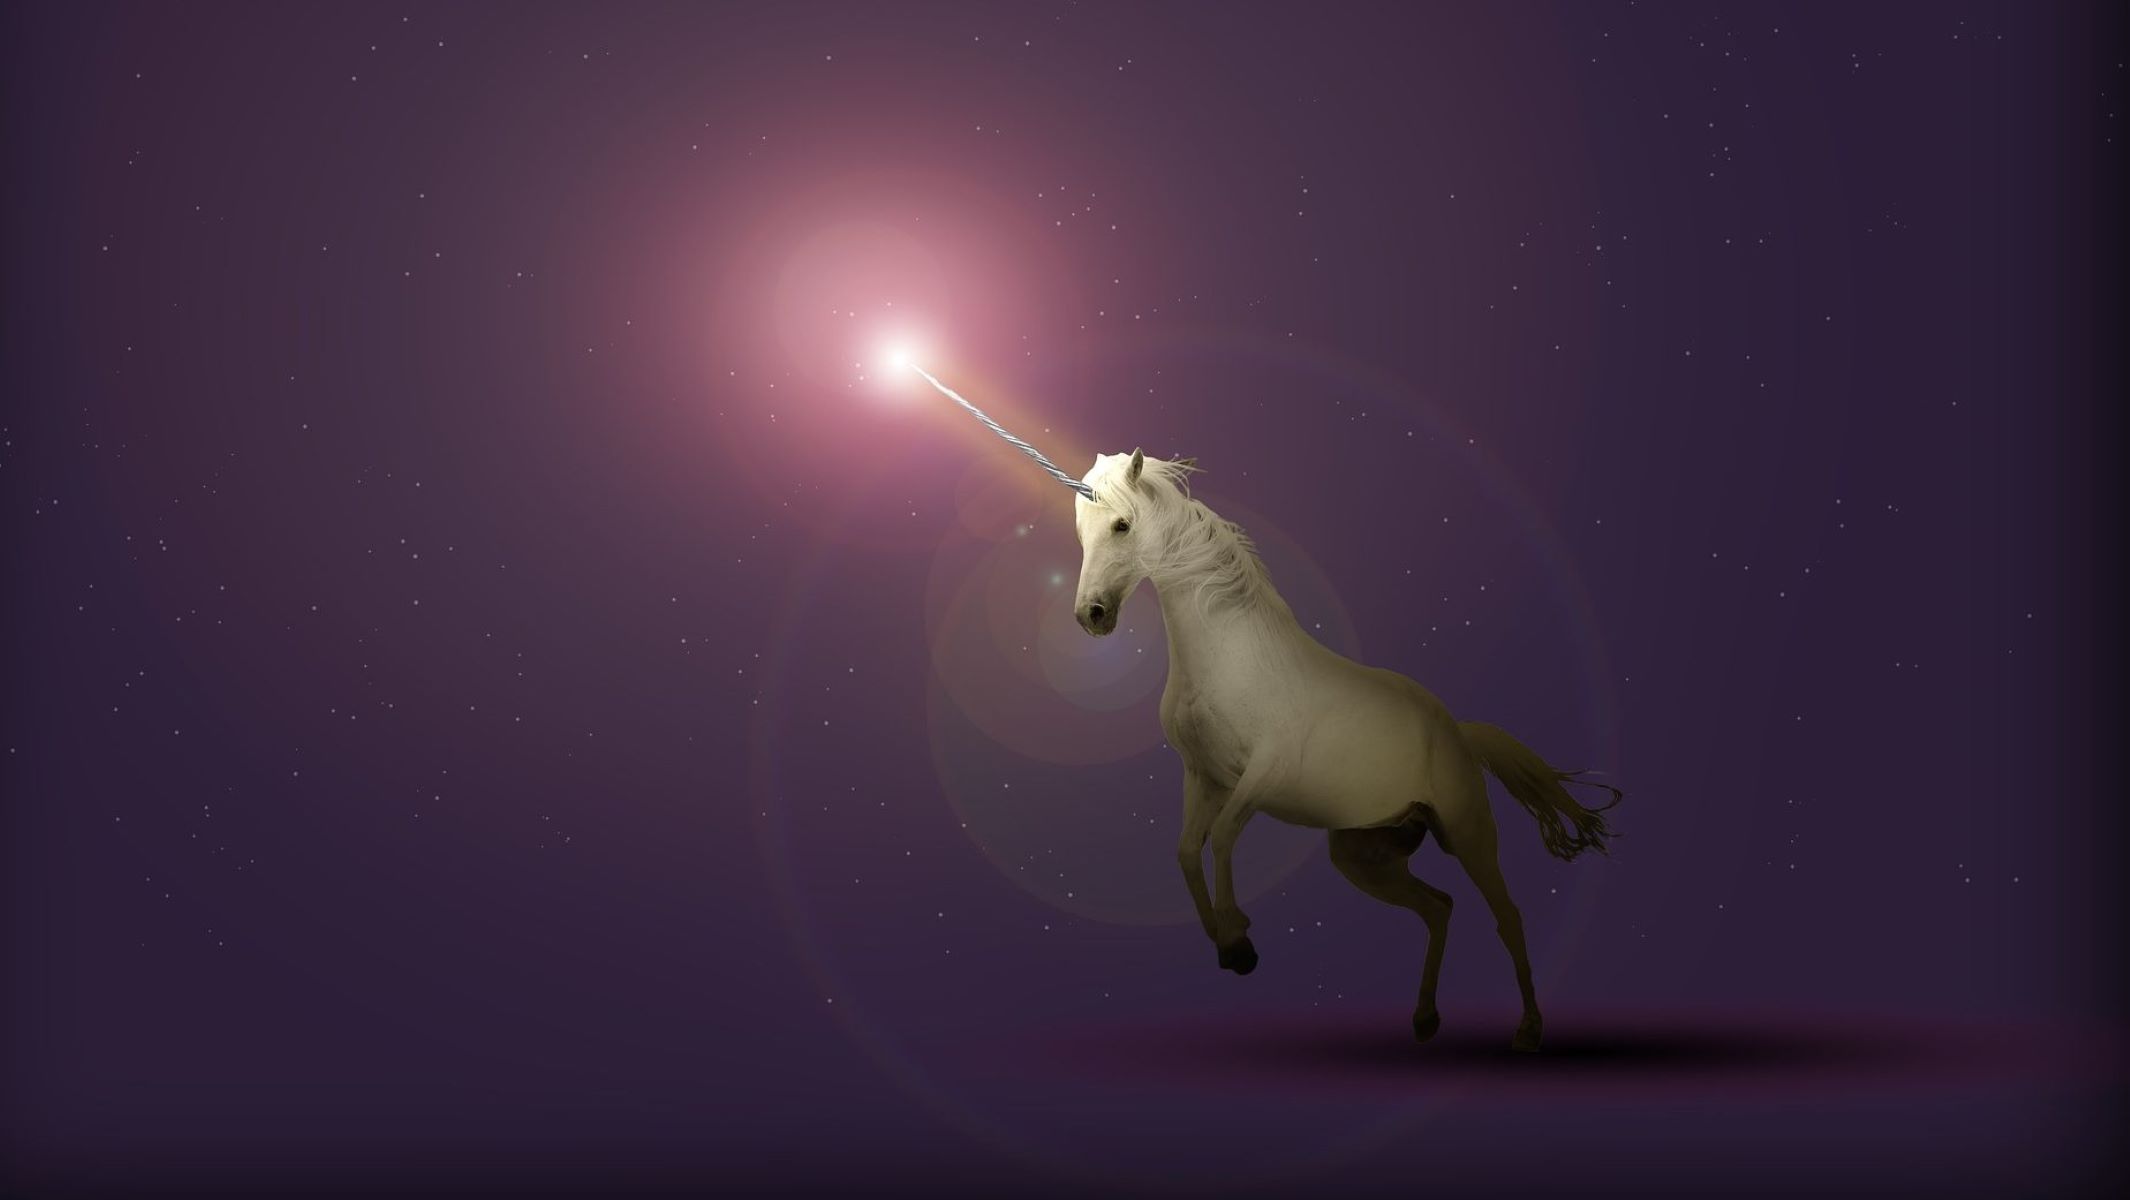 Instacart’s Impressive IPO Launch Proves Unicorns Can Thrive In The Public Market